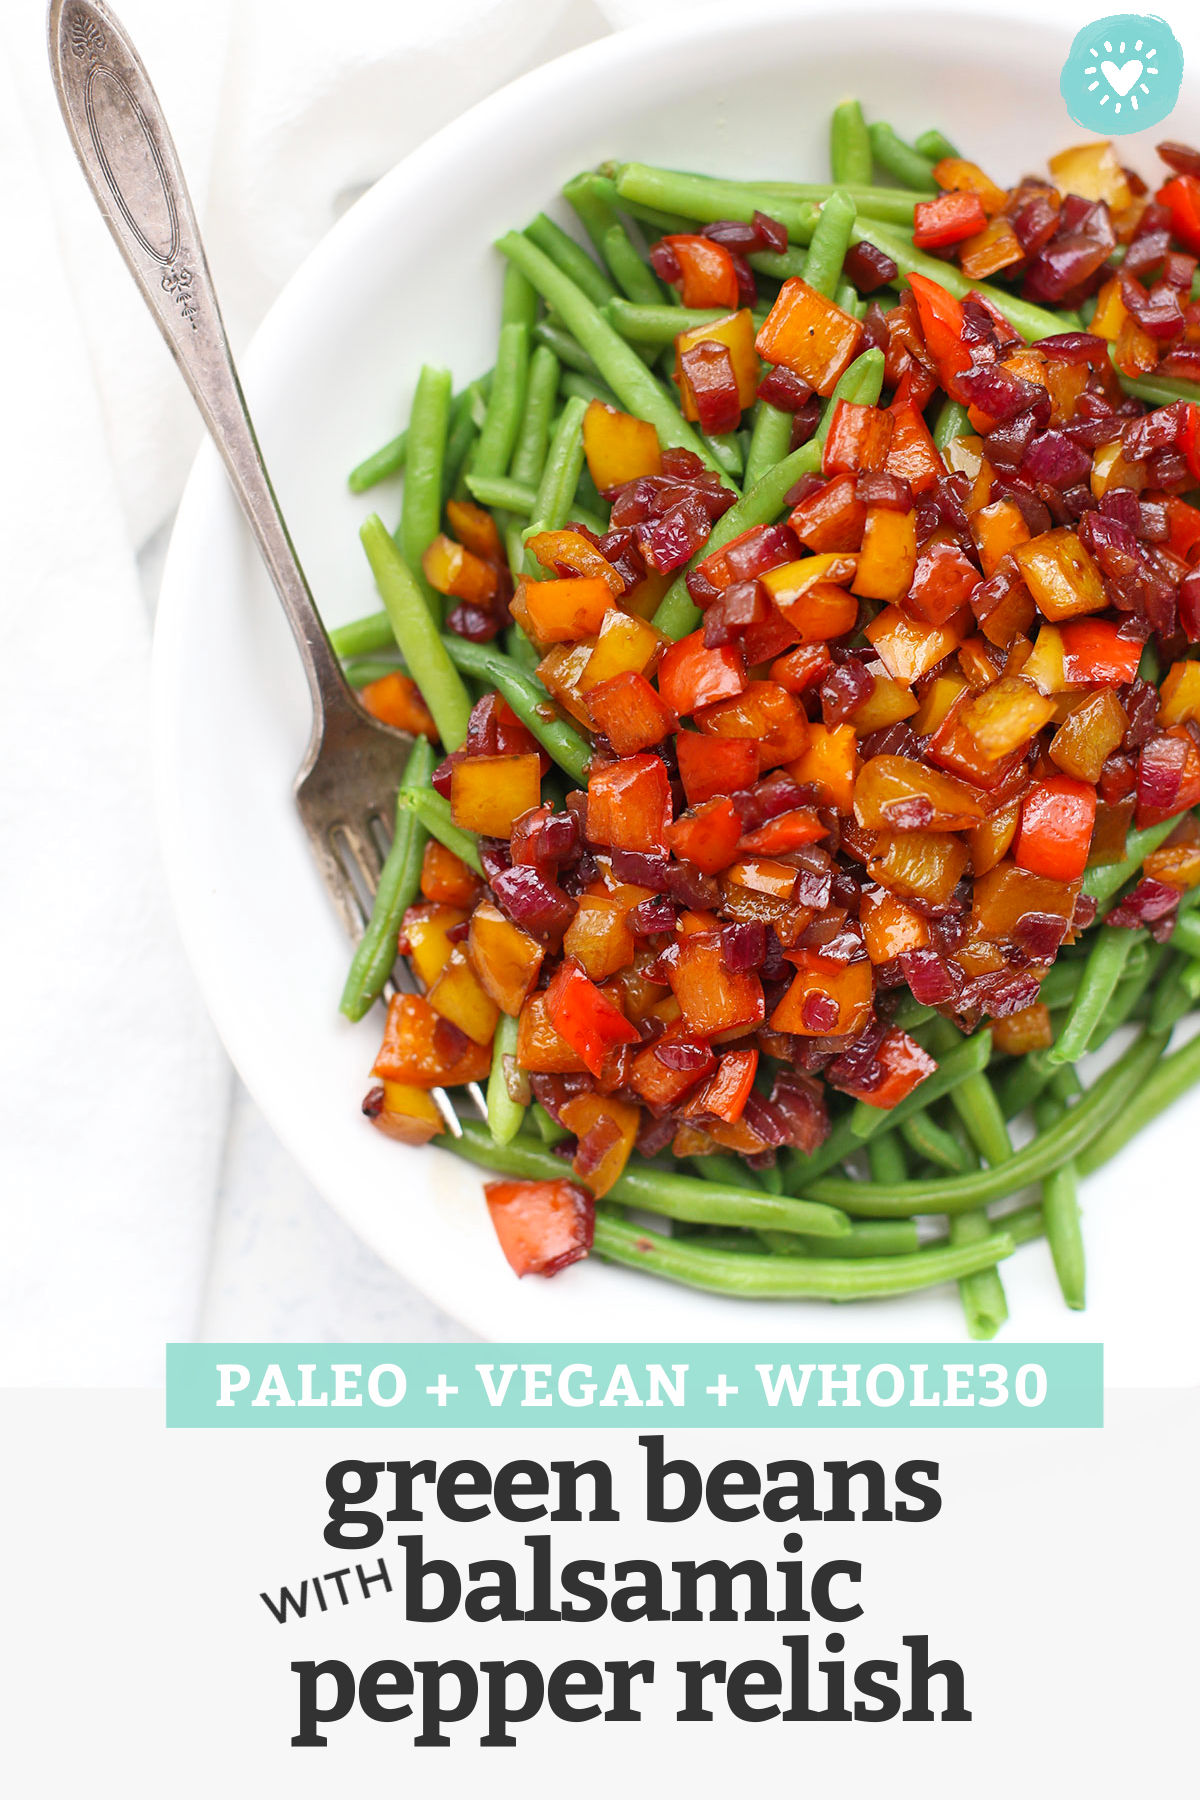 Green Beans with Balsamic Pepper Relish - This bright, beautiful side dish will steal the spotlight at dinner, thanks to the sweet, tangy balsamic bell pepper relish. It's incredible! (Vegan, Paleo & Whole30 approved!) // pepper relish // green beans recipe // balsamic green beans // green beans with bell peppers // gluten free // dairy free // vegetarian